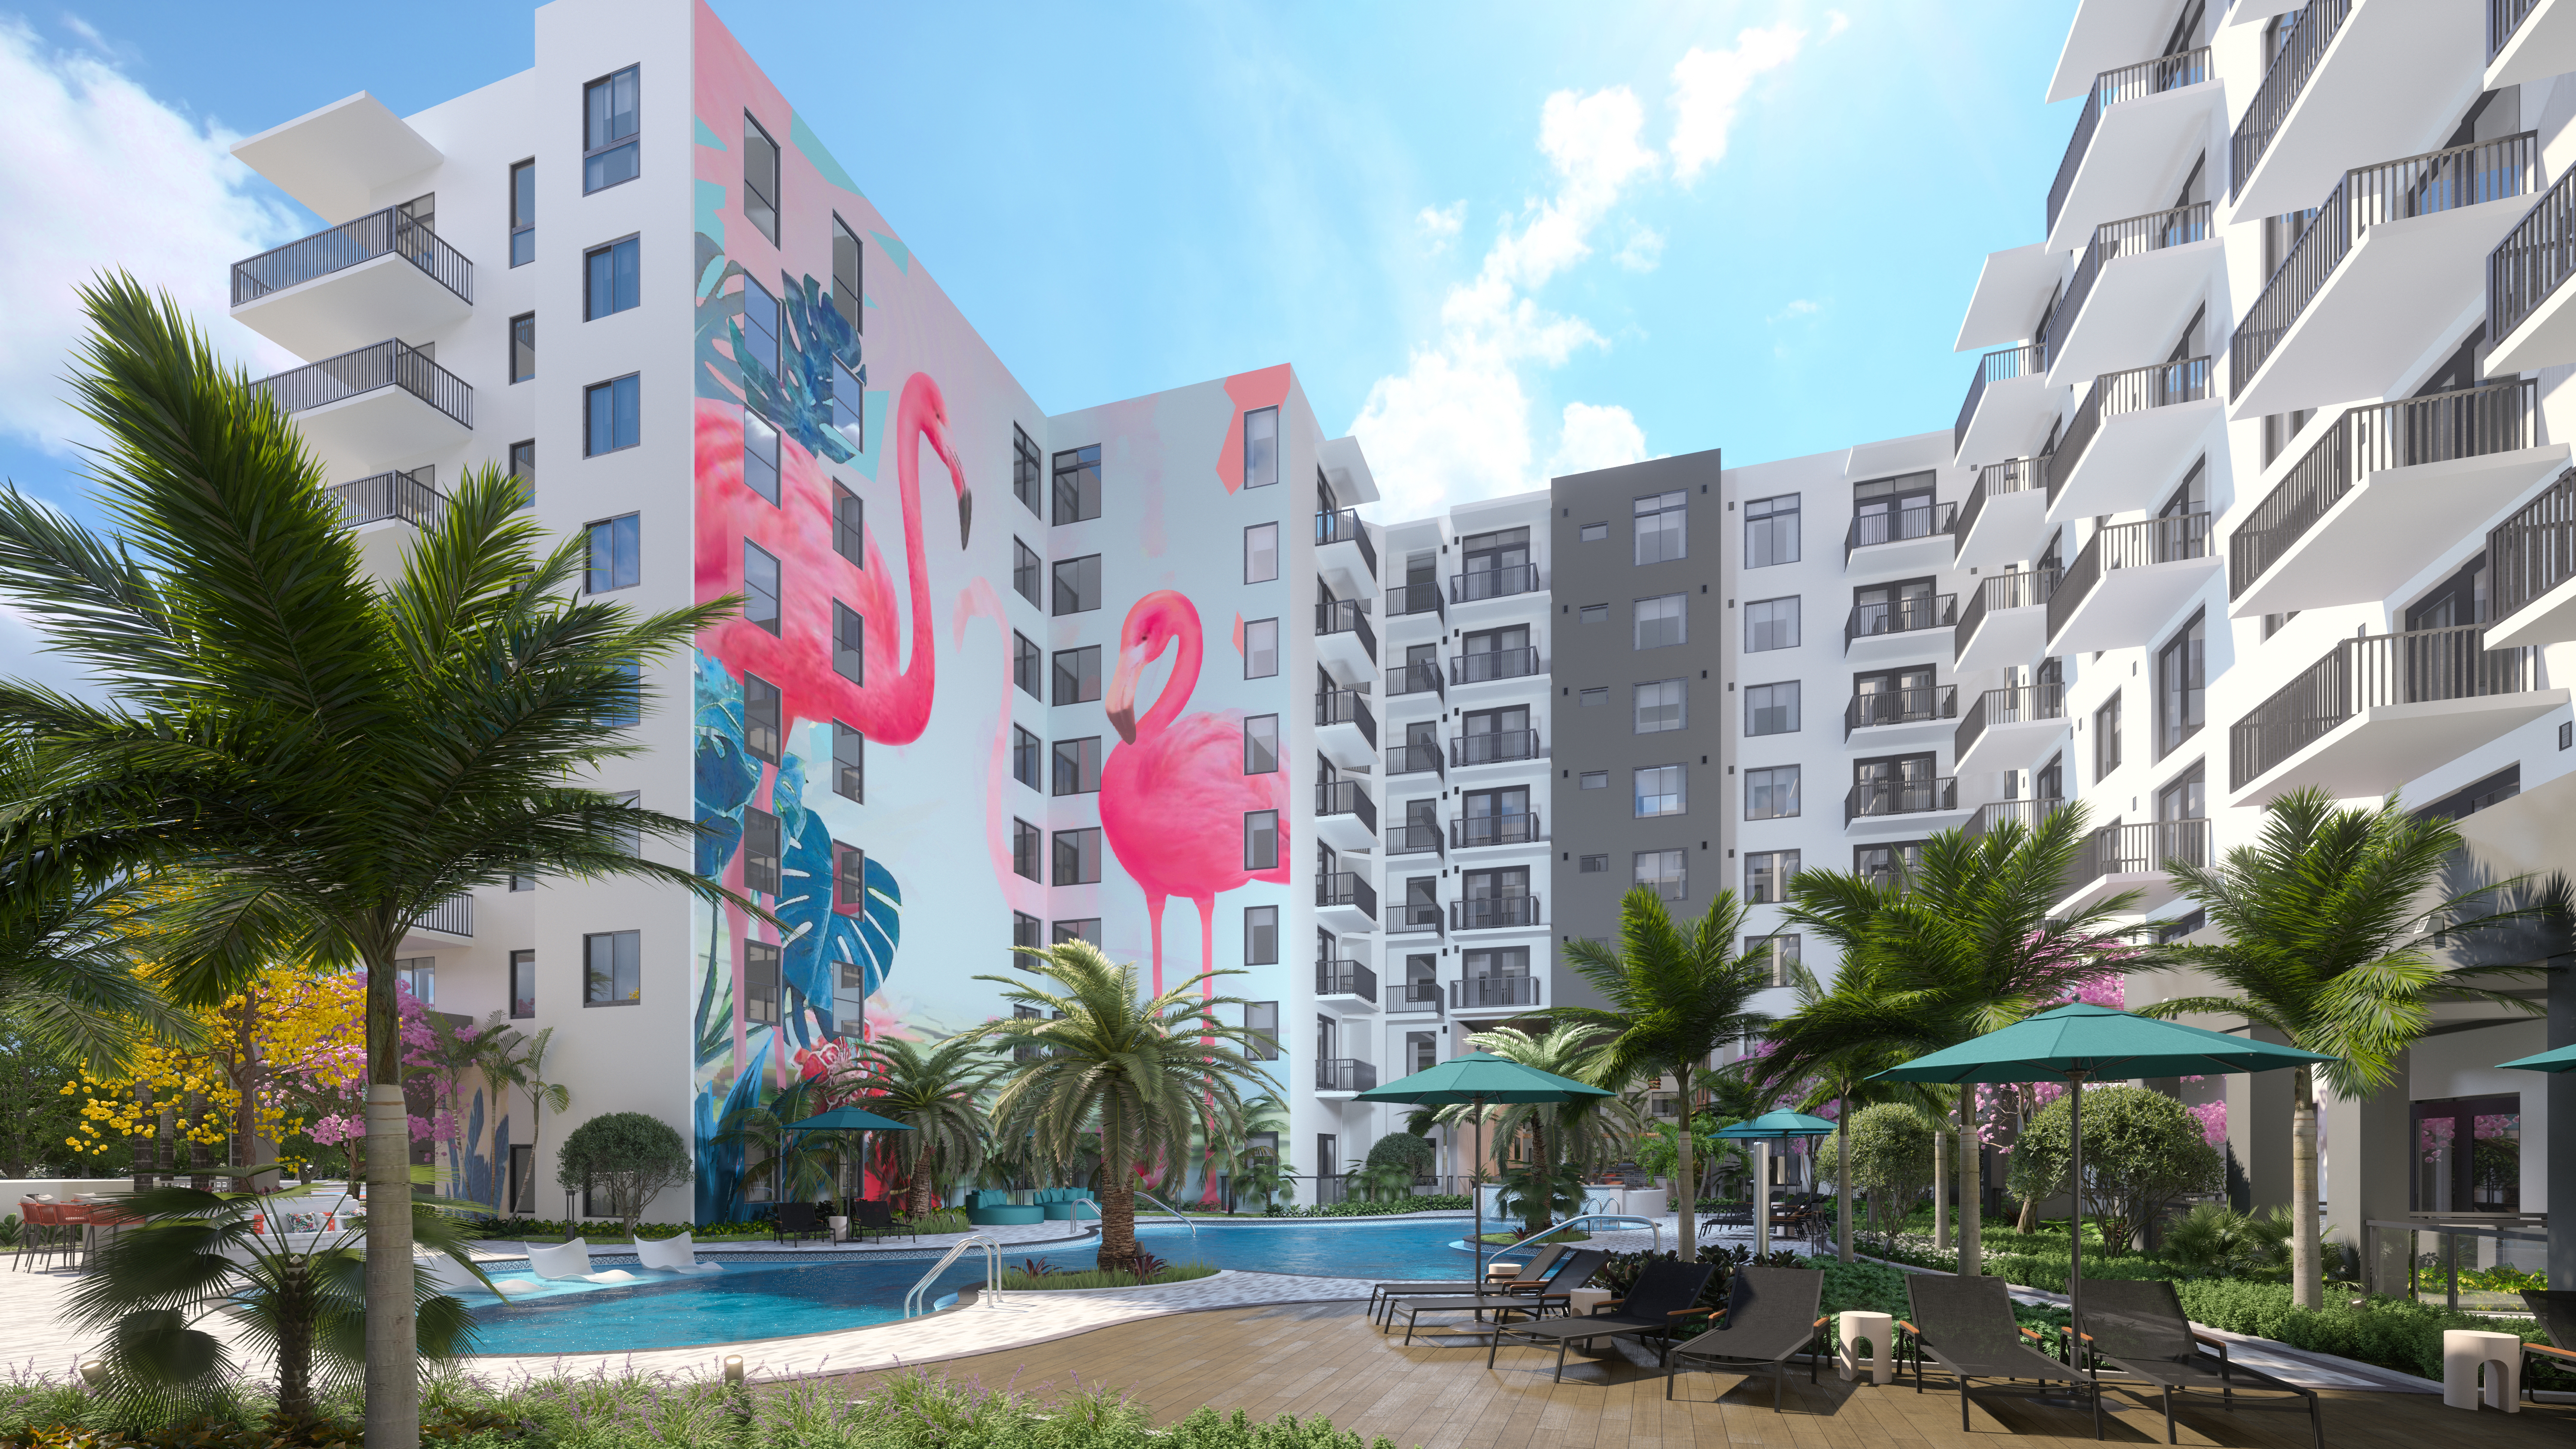 Leksa at CityPlace: Luxury Apartments and Penthouses Now Preleasing in Miami’s Doral District